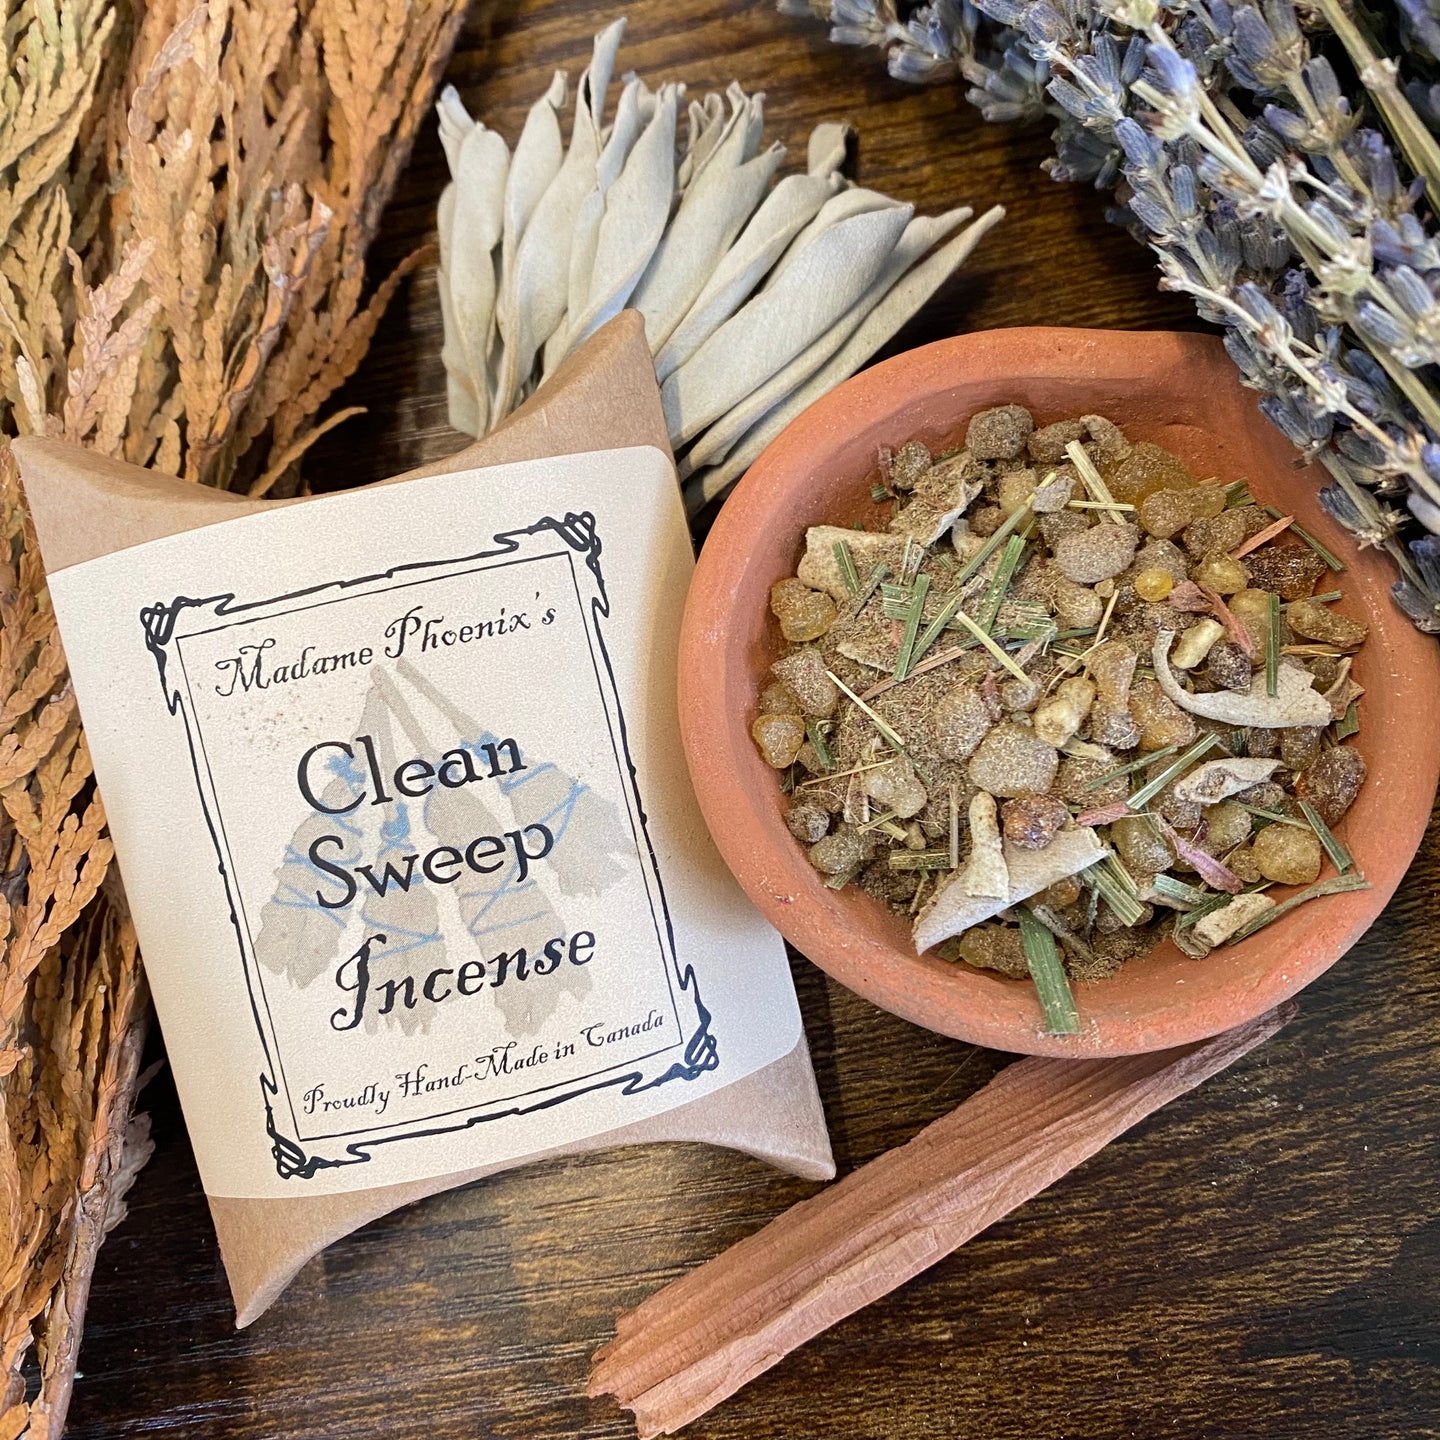 Clean Sweep Purification & Blessing Incense